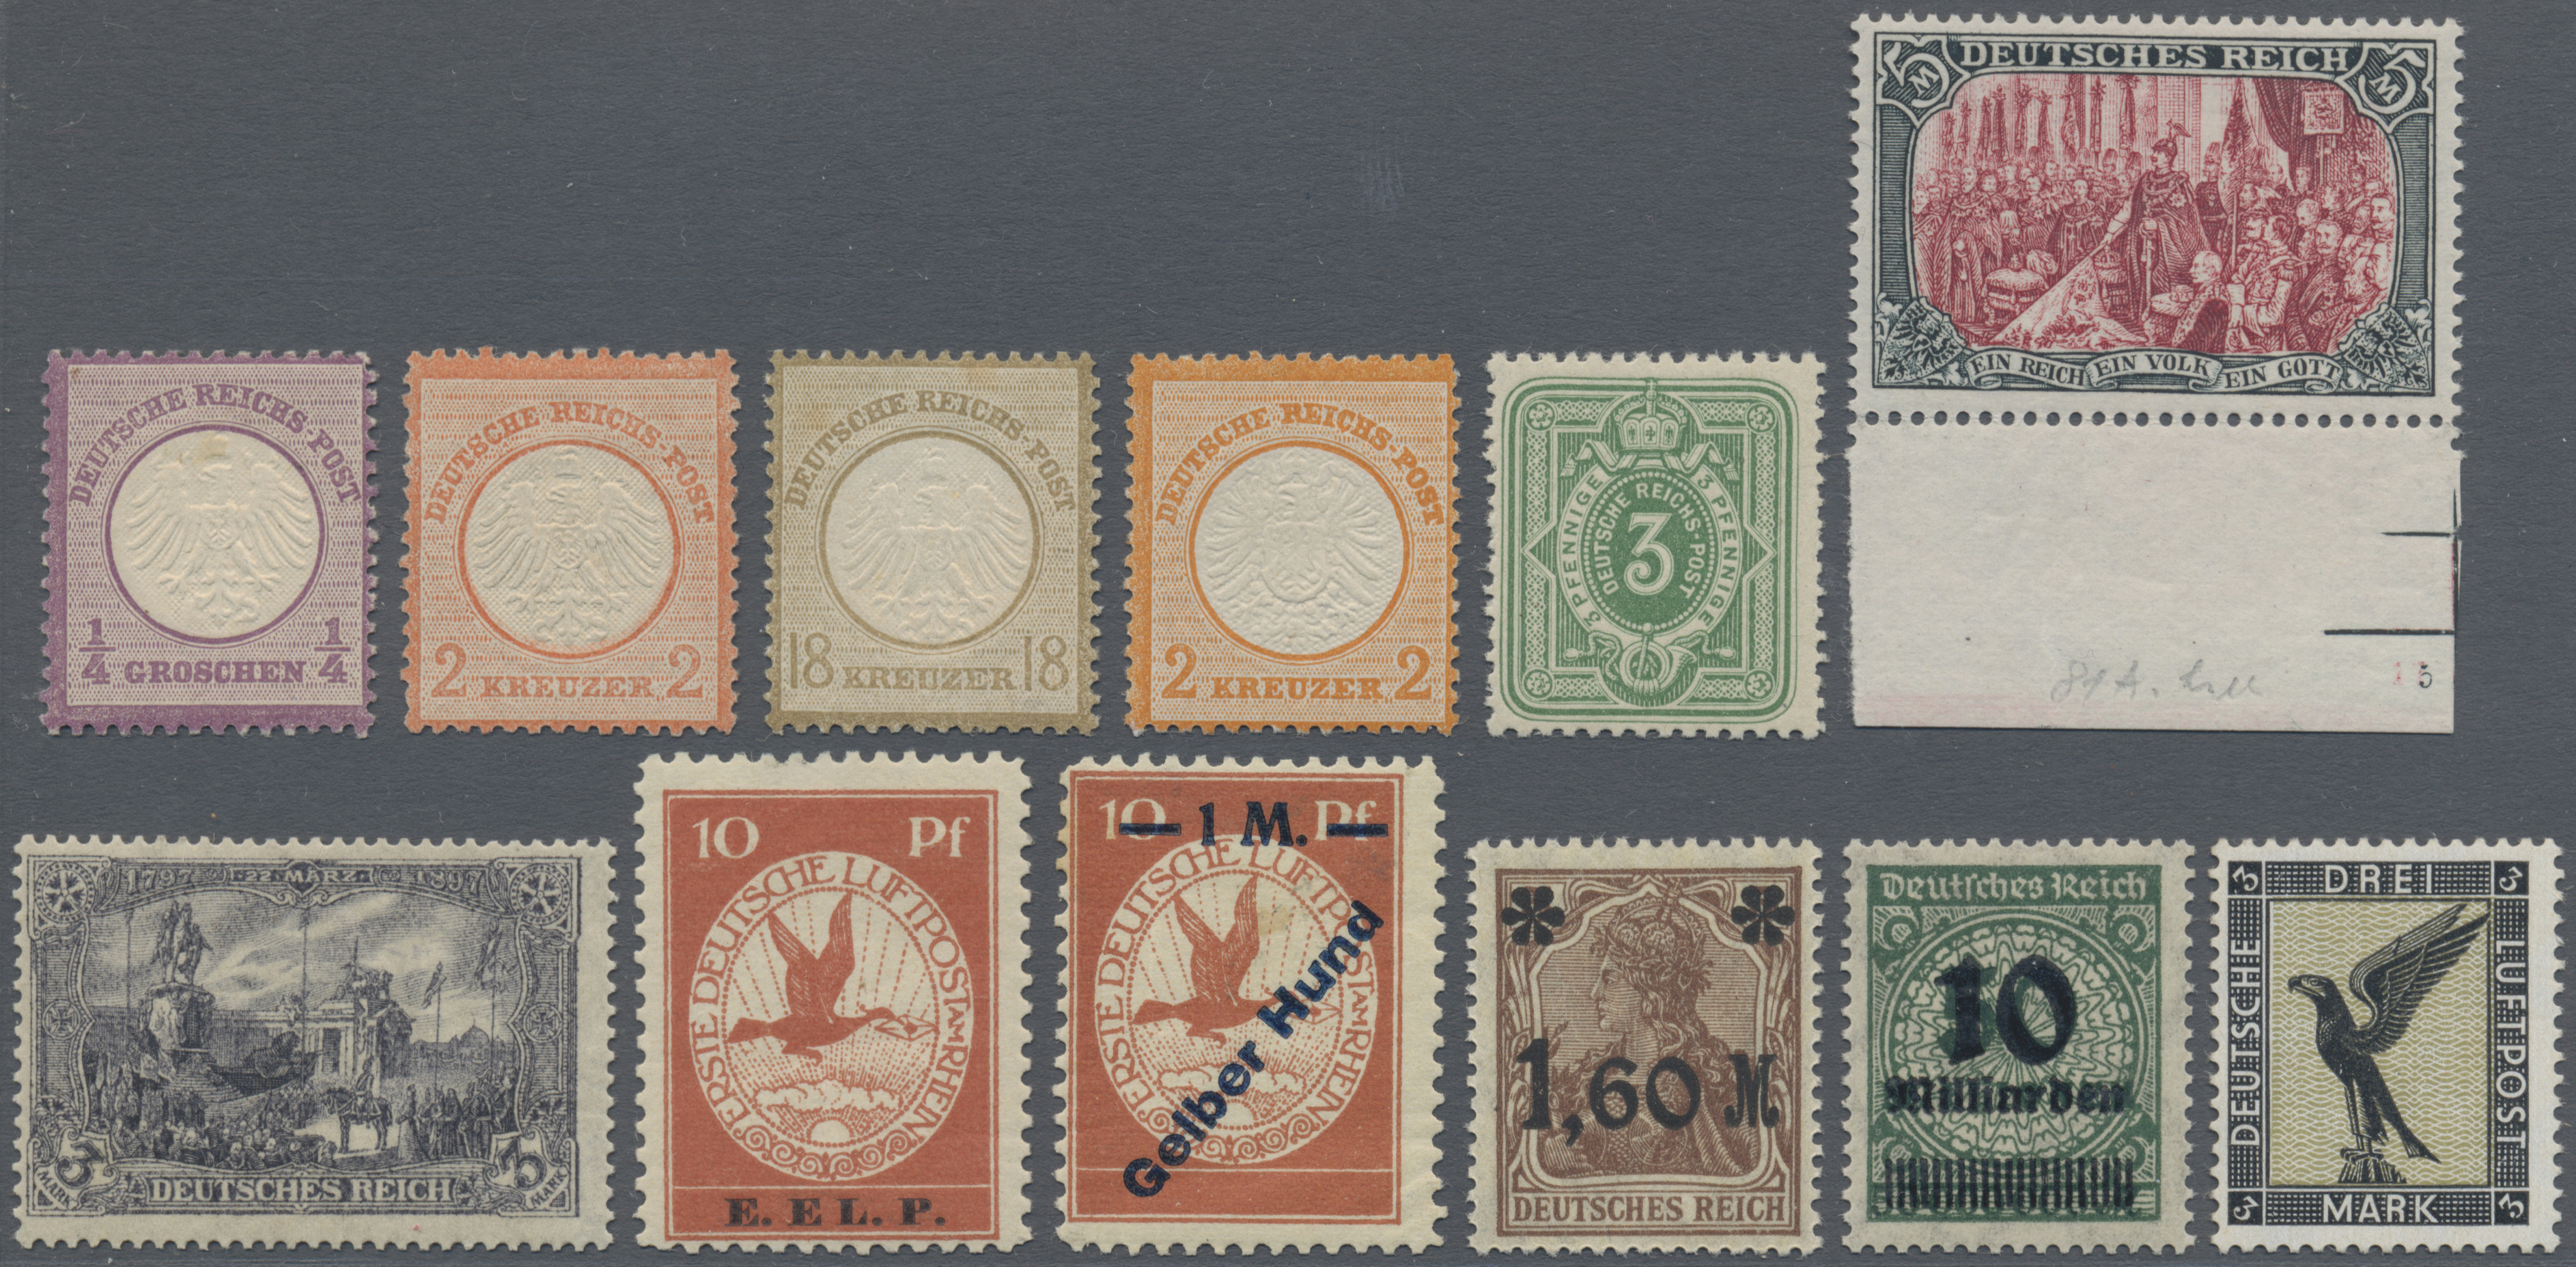 Lot 36437 - Deutsches Reich  -  Auktionshaus Christoph Gärtner GmbH & Co. KG Sale #44 Collections Germany